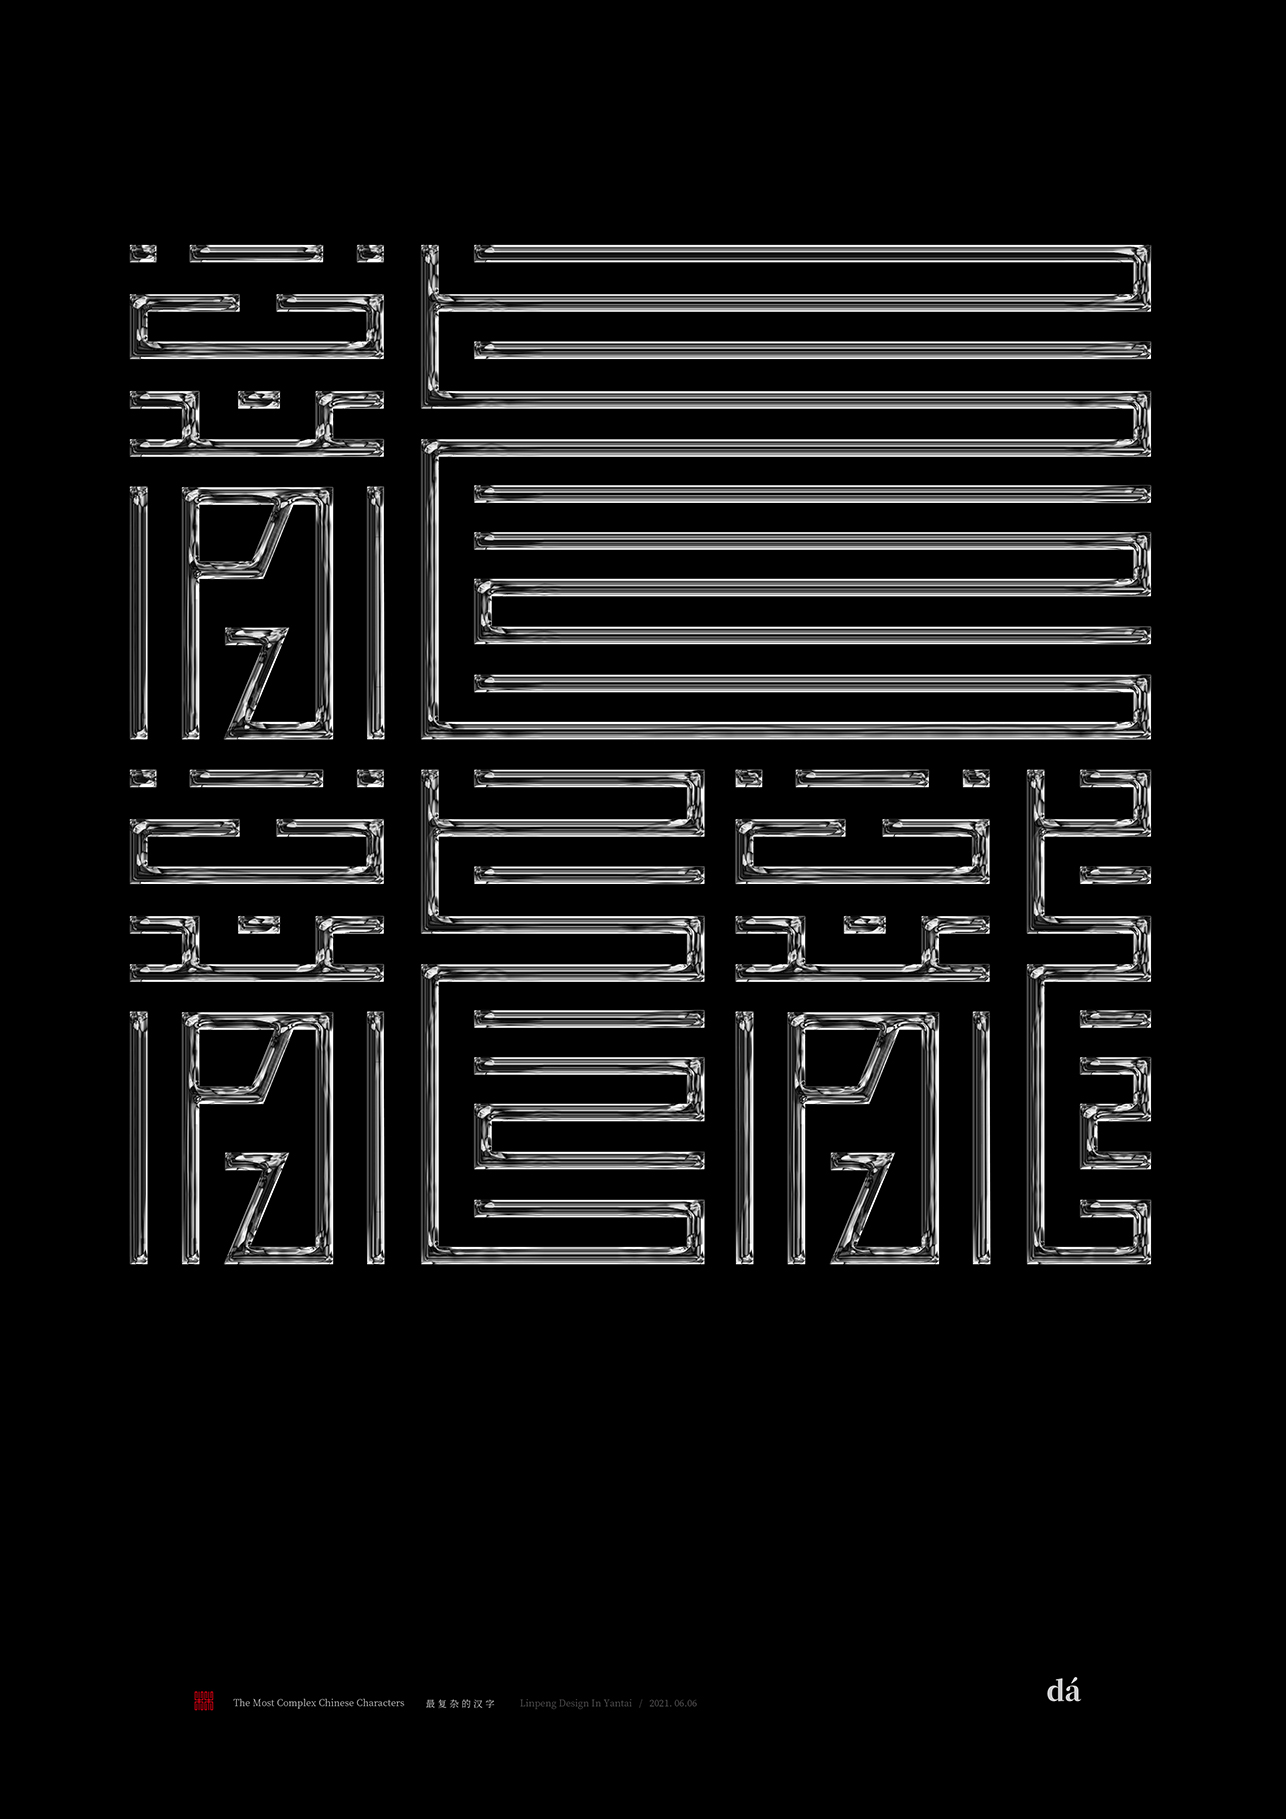 28P Collection of the latest Chinese font design schemes in 2021 #.393